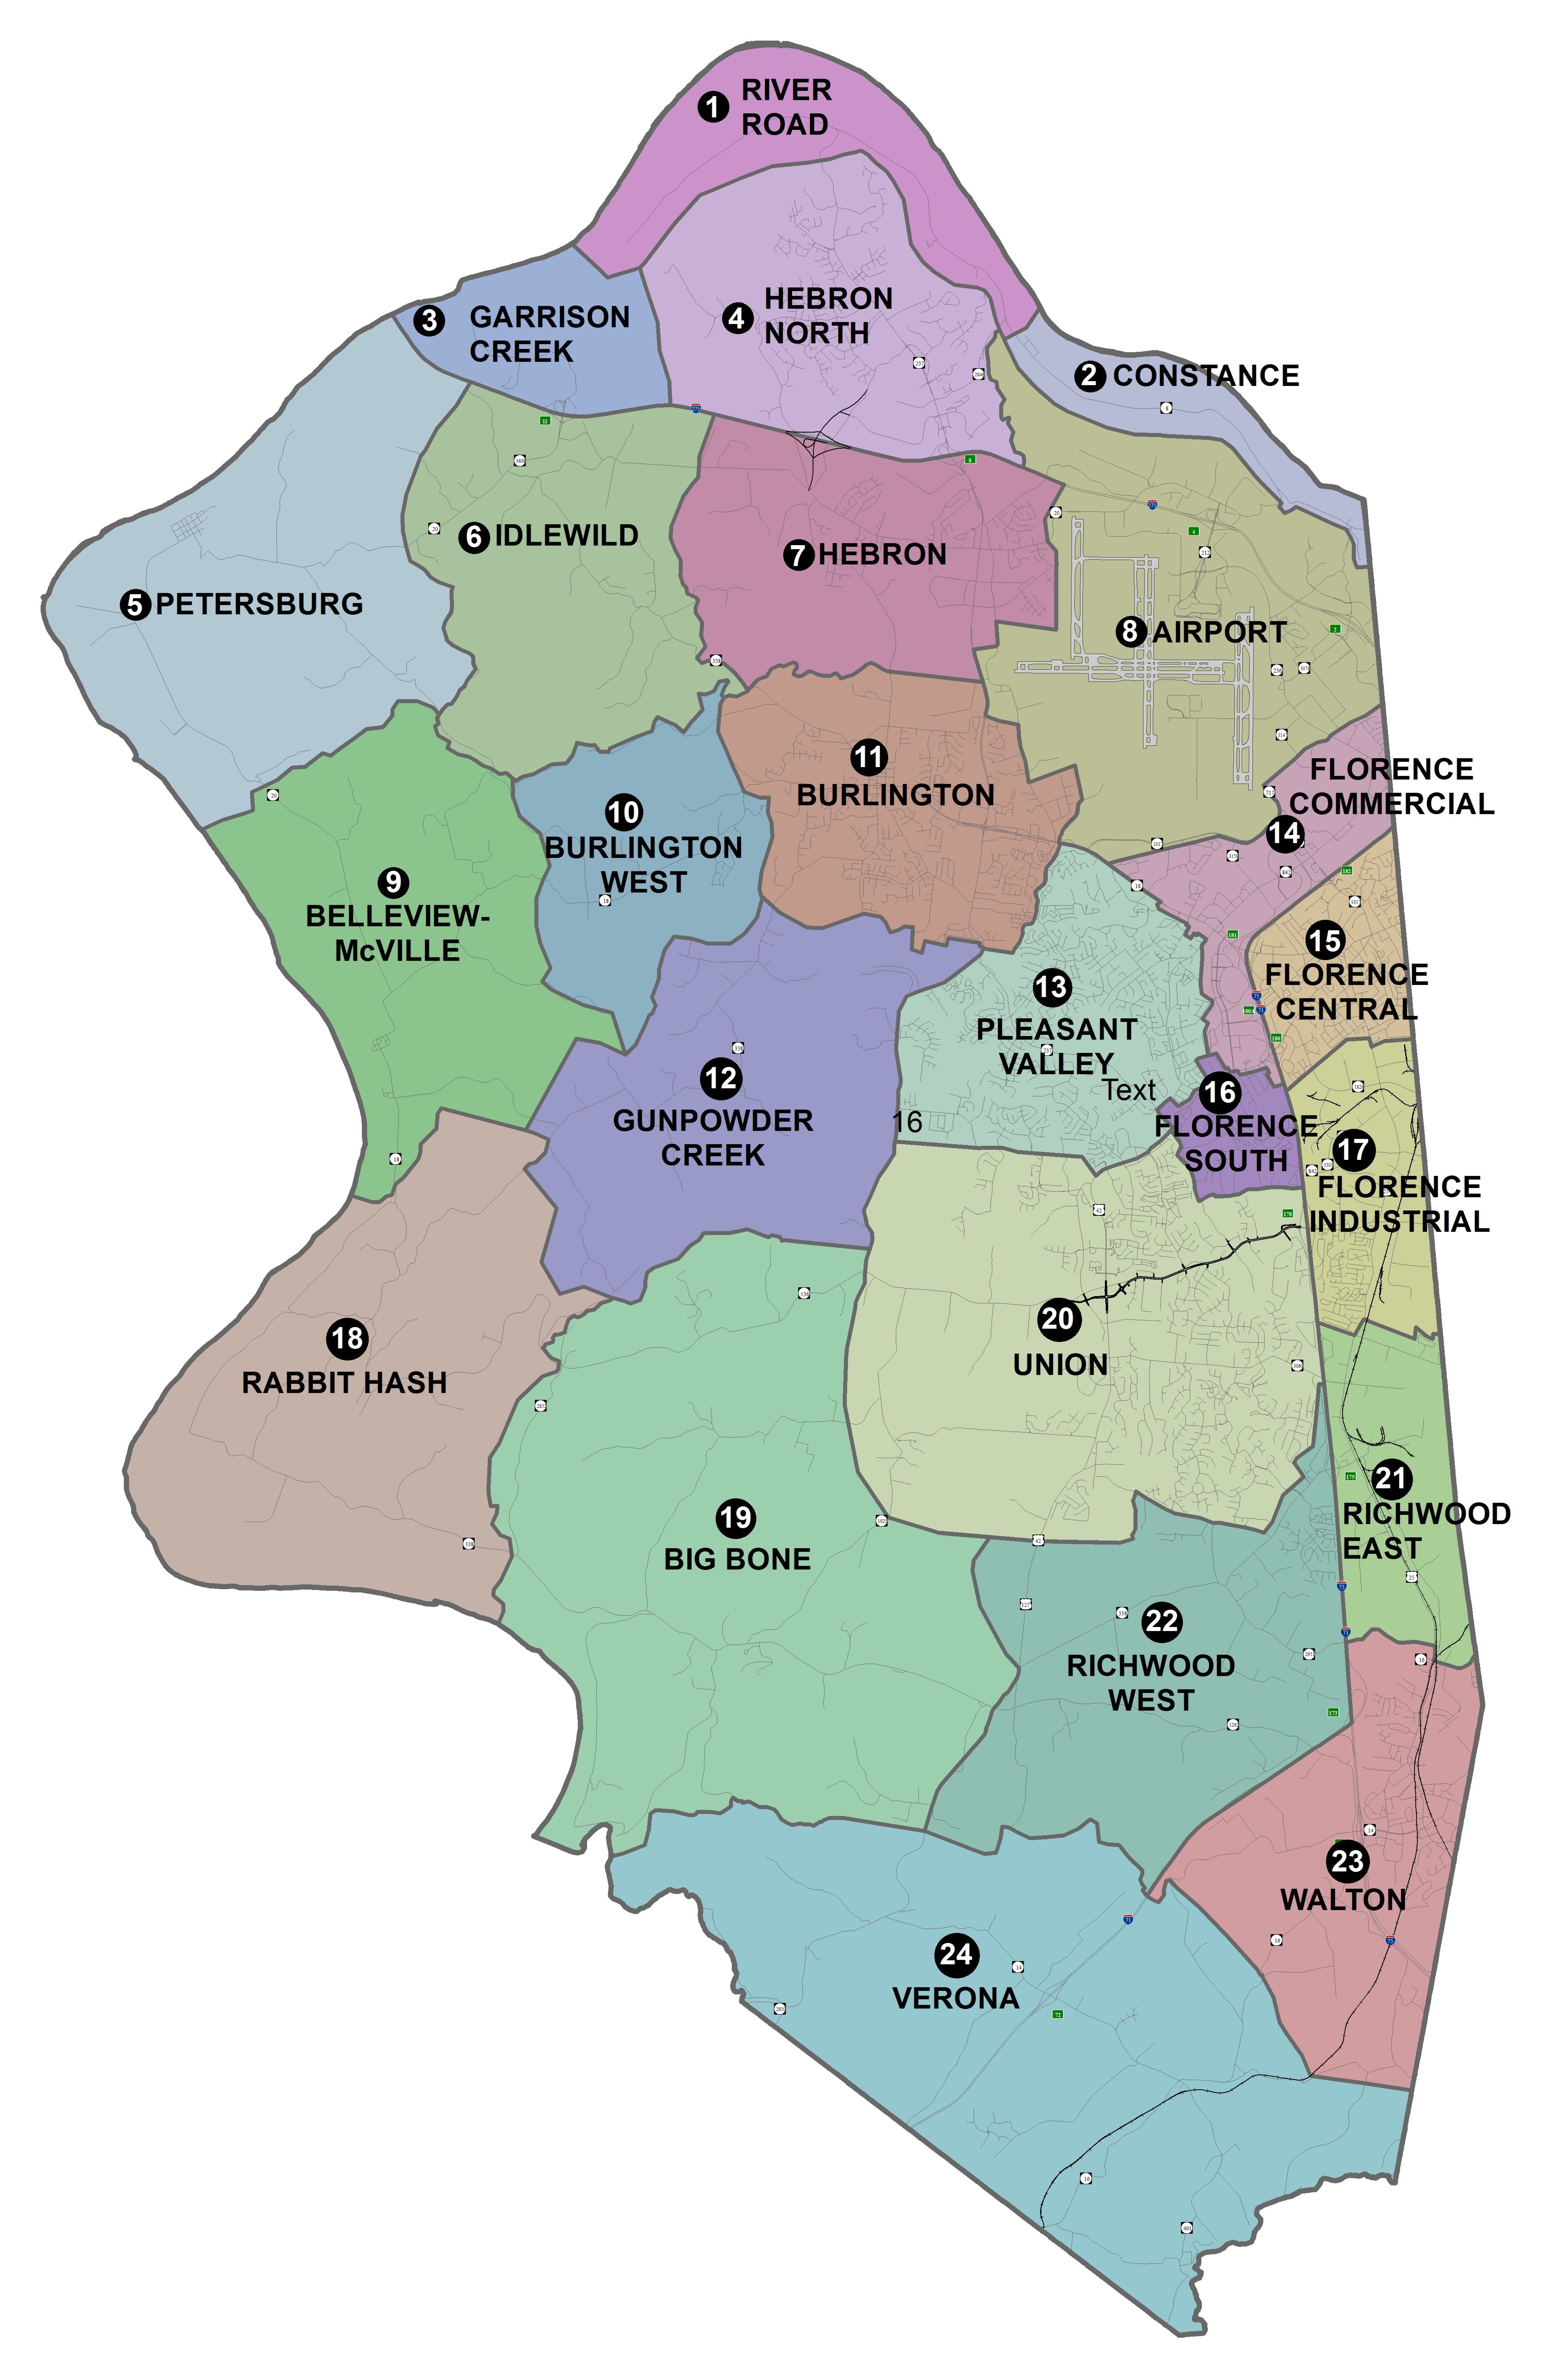 Map of Boone County future land use geographic areas. From north to south and west to east: River Road 1, Constance 2, Garrison Creek 3, Hebron North 4, Petersburg 5, Idlewild 6, Hebron 7, Airport 8, Belleview McVille 9, Burlington West 10, Burlington 11, Gunpowder Creek 12, Pleasant Valley 13, Florence Commercial 14, Florence Central 15, Florence Industrial 17, Rabbit Hash 18, Big Bone 19, Union 20, Richwood East 21, Richwood West 22, Walton 23, Verona 24